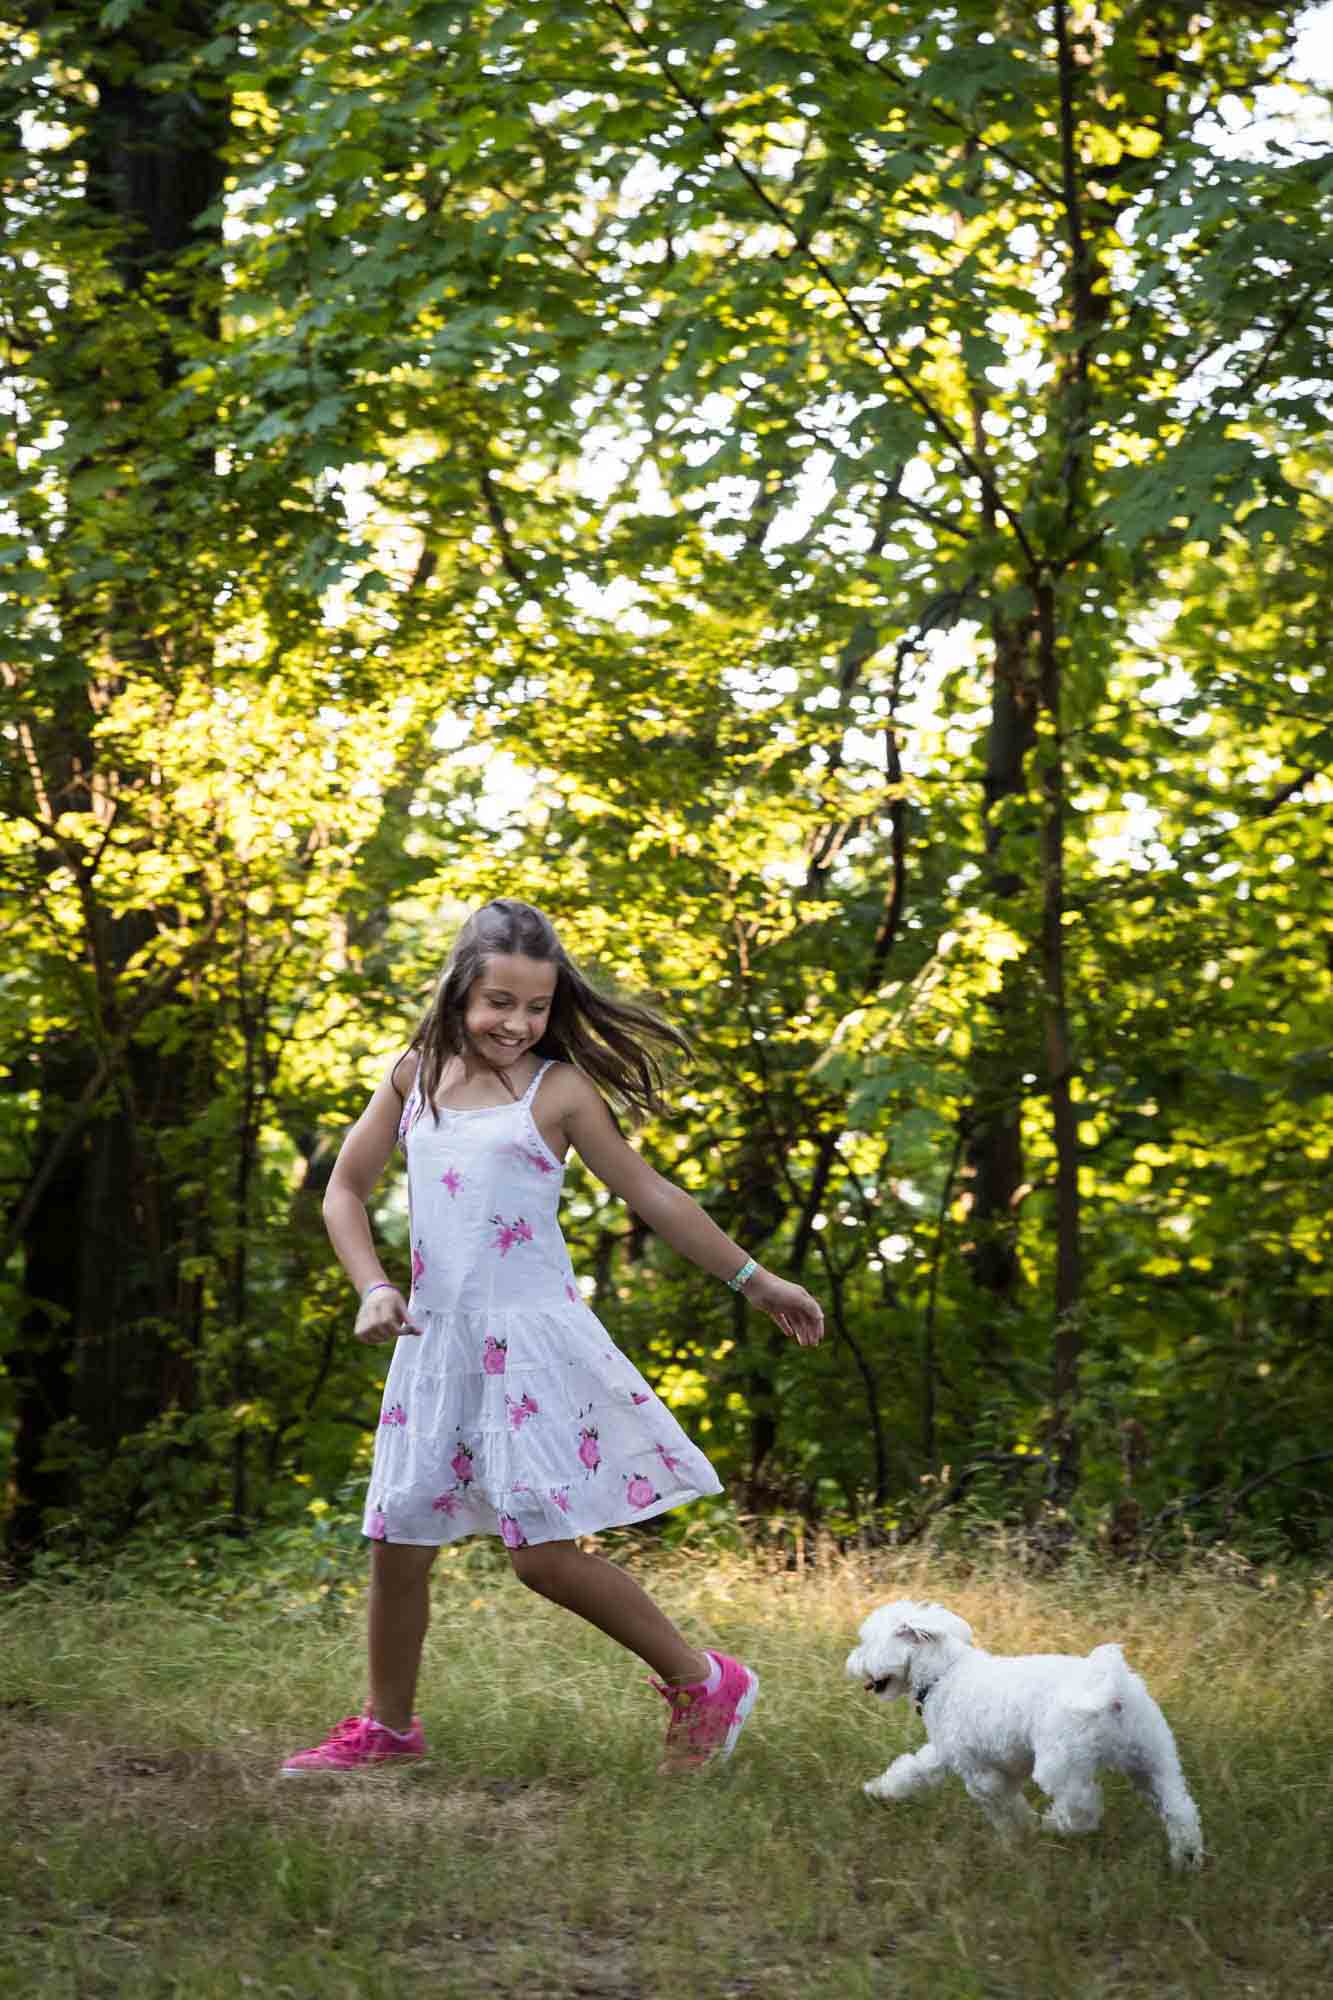 Small white dog chasing girl wearing floral dress during Forest Hills family portrait